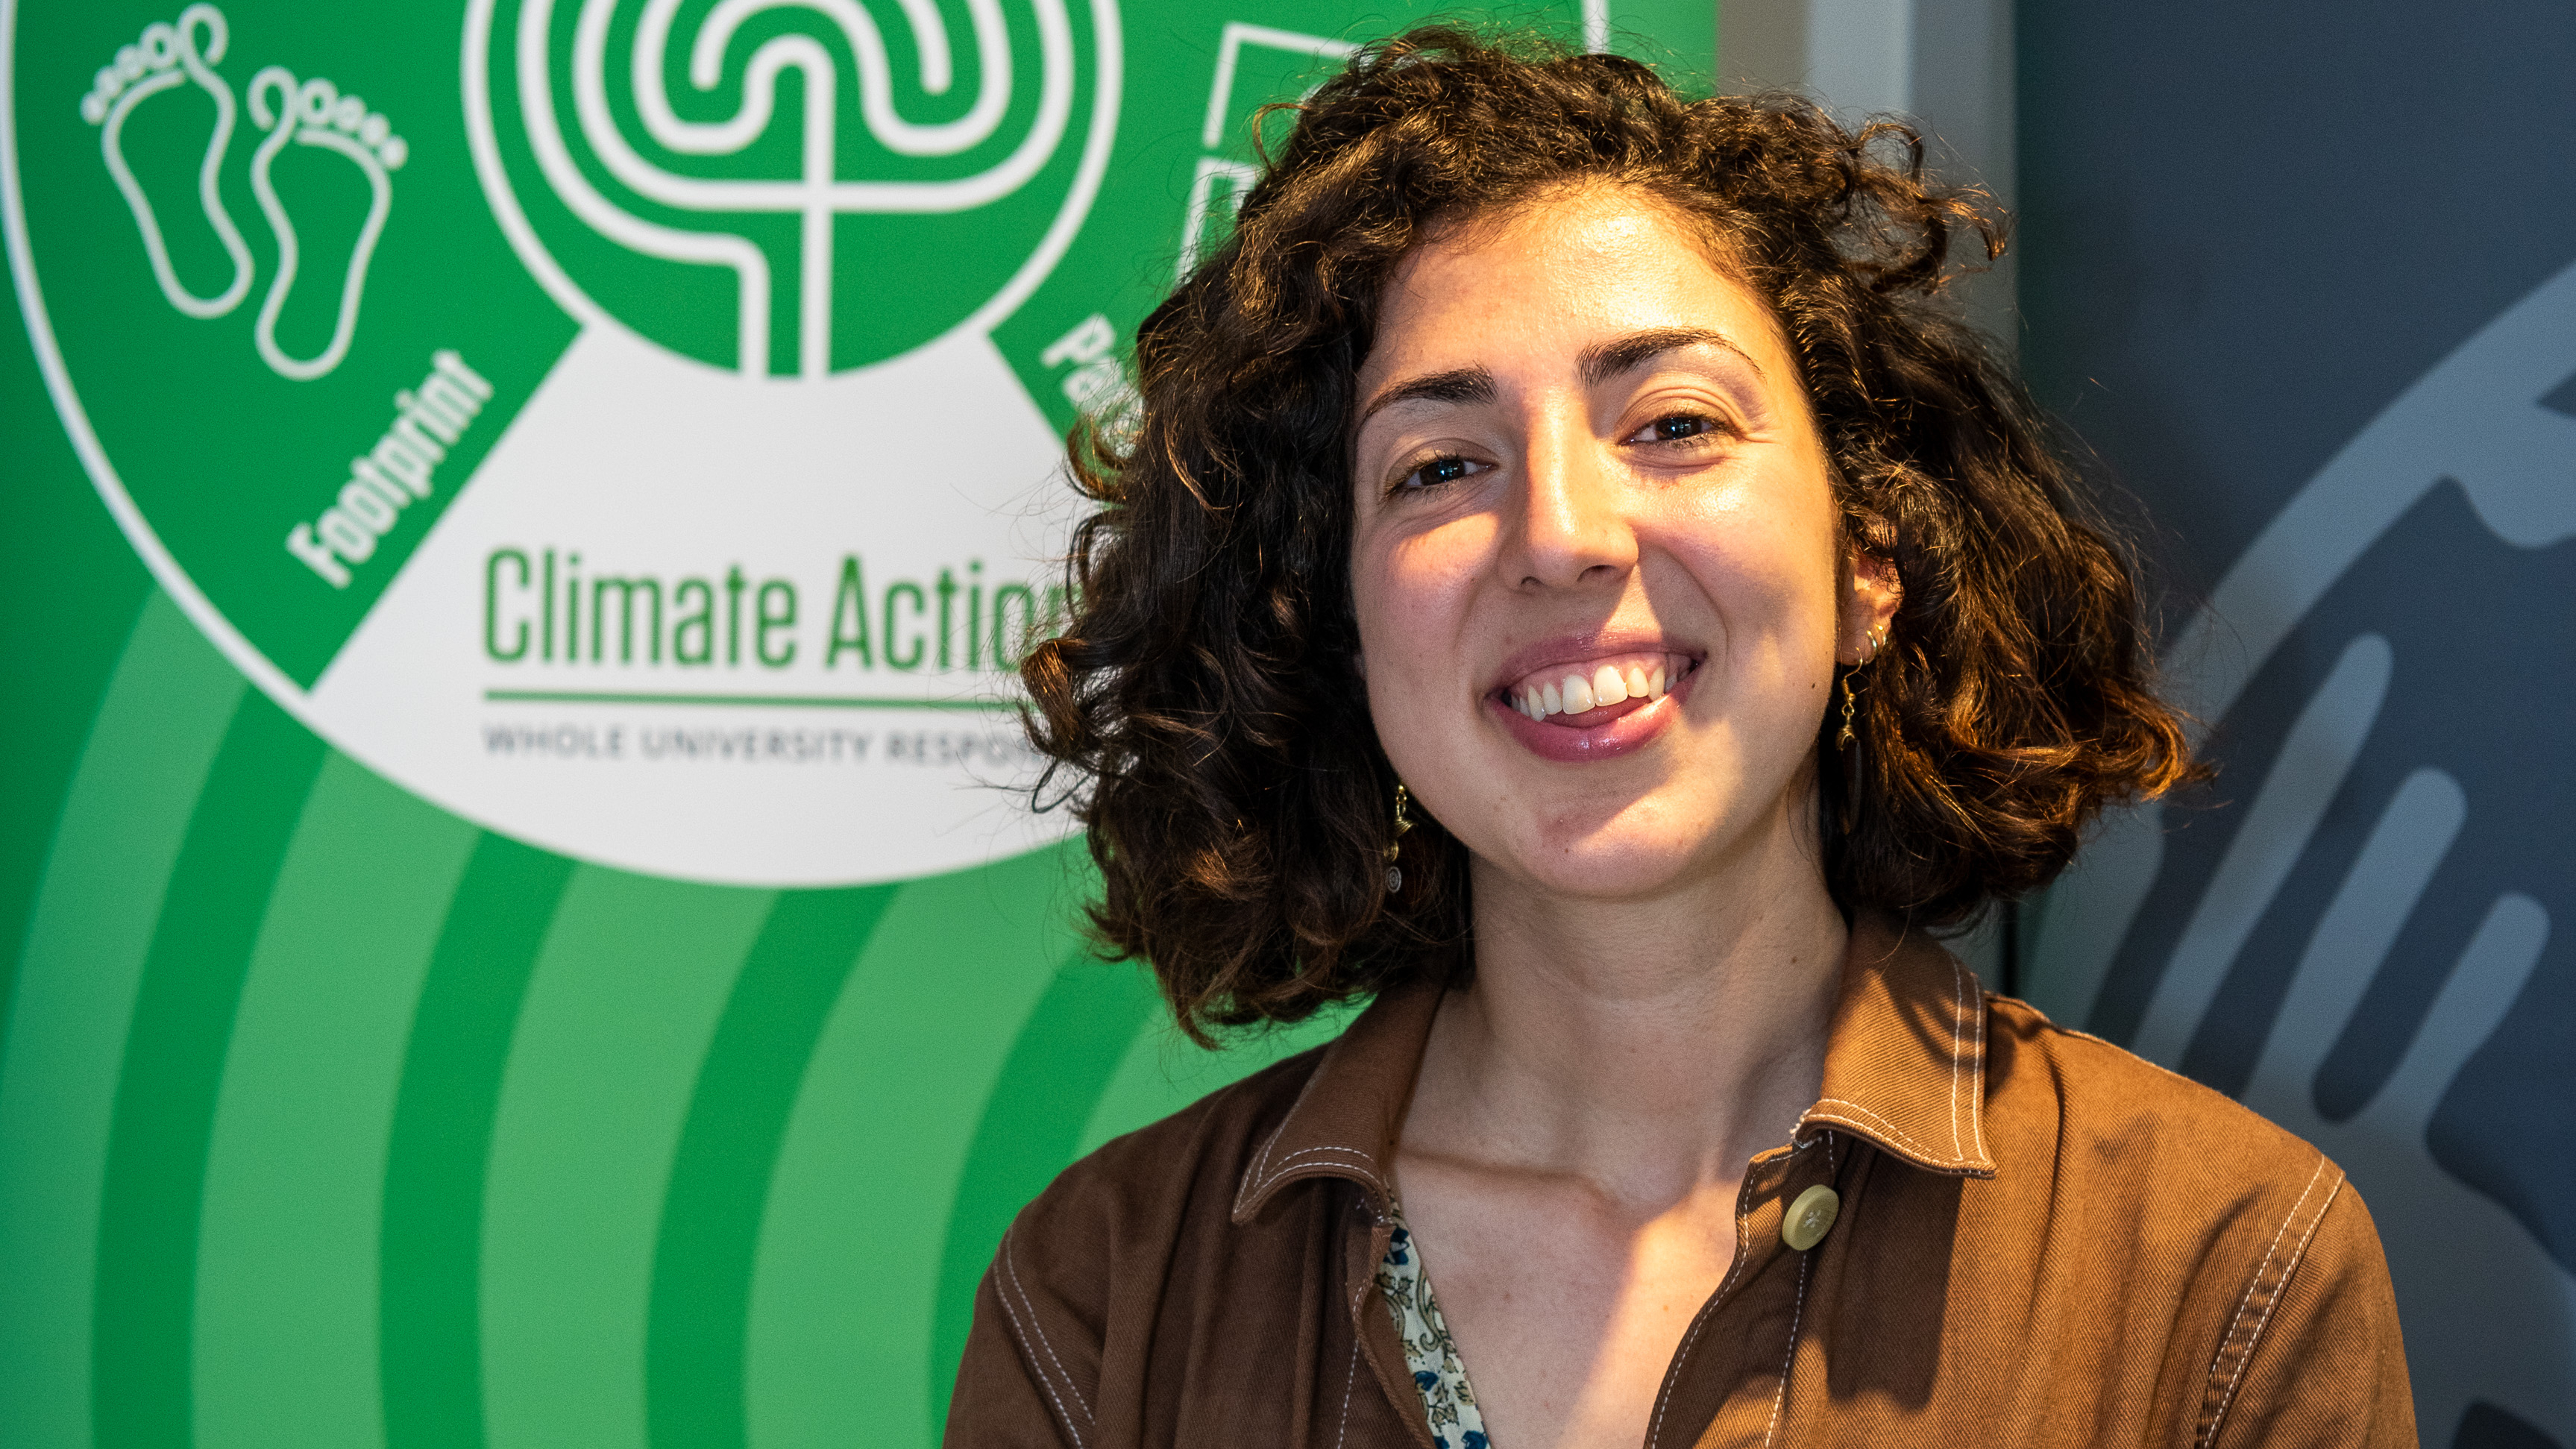 Beatrice Clementel at the Climate Action Awards 